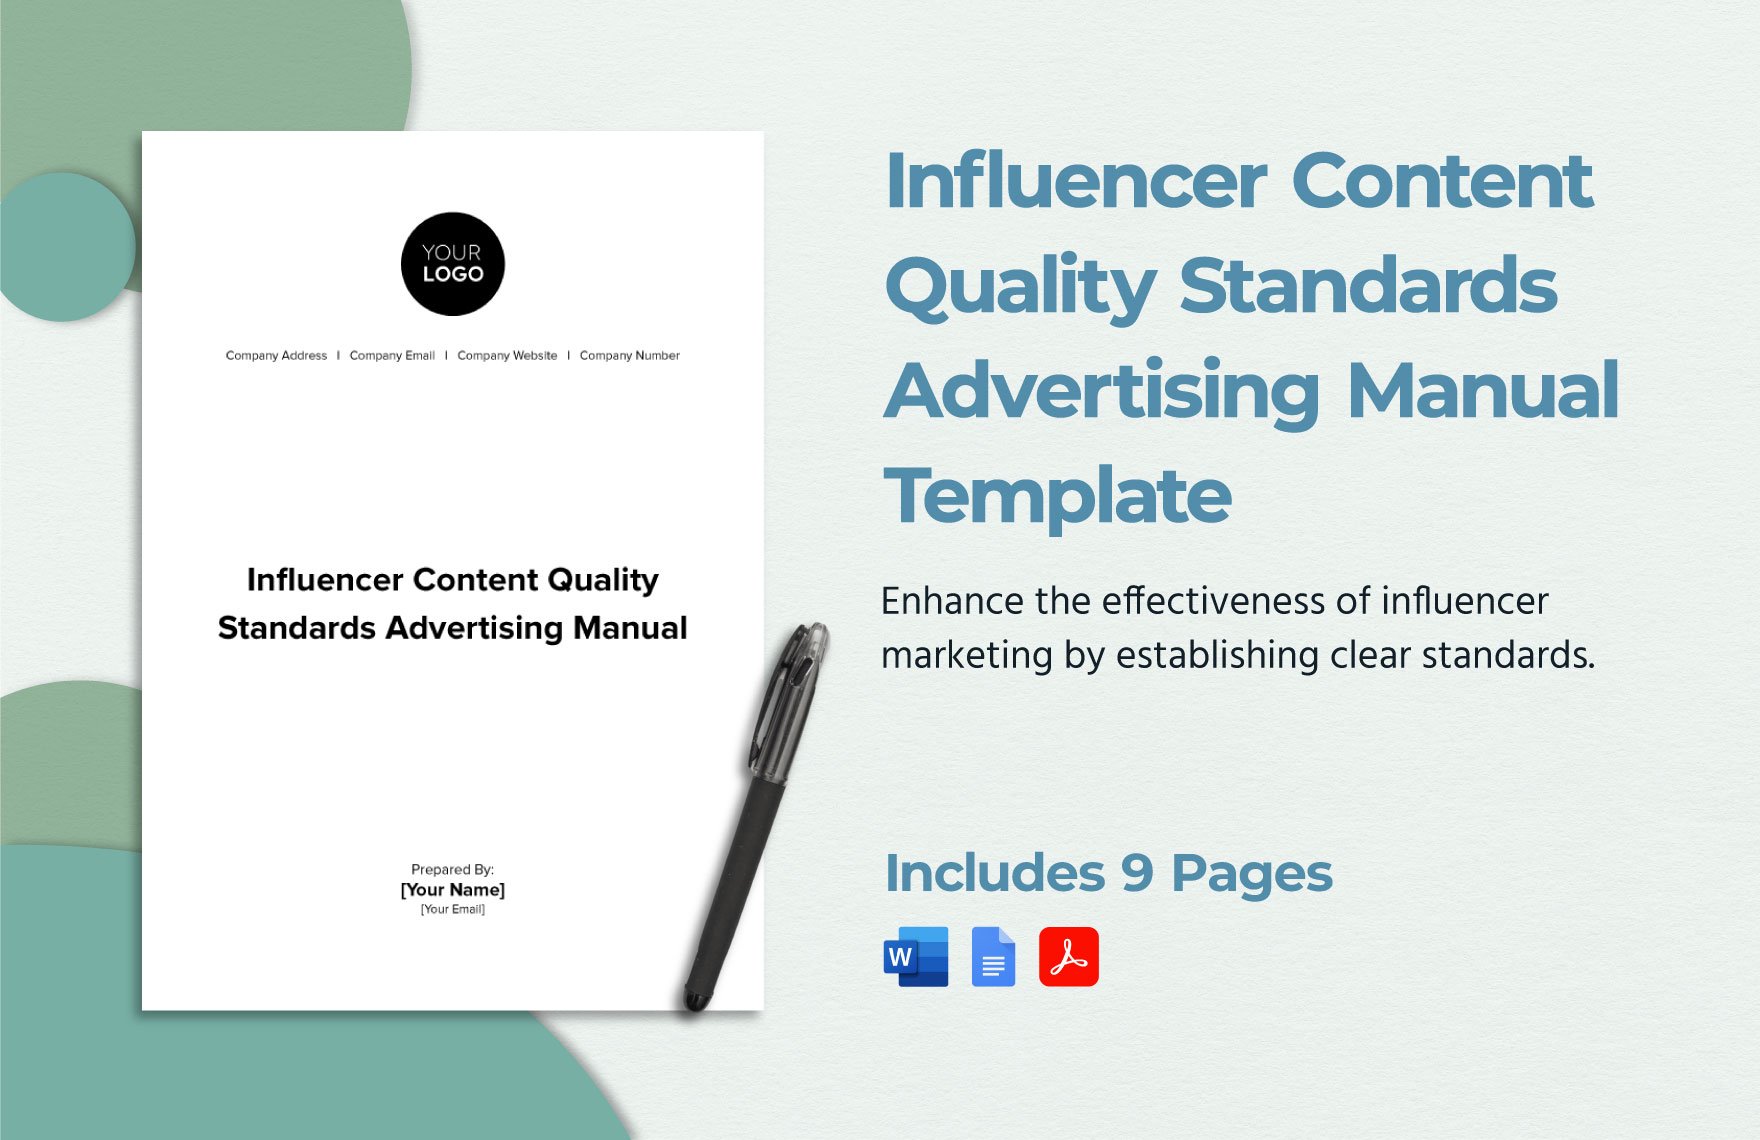 Influencer Content Quality Standards Advertising Manual Template